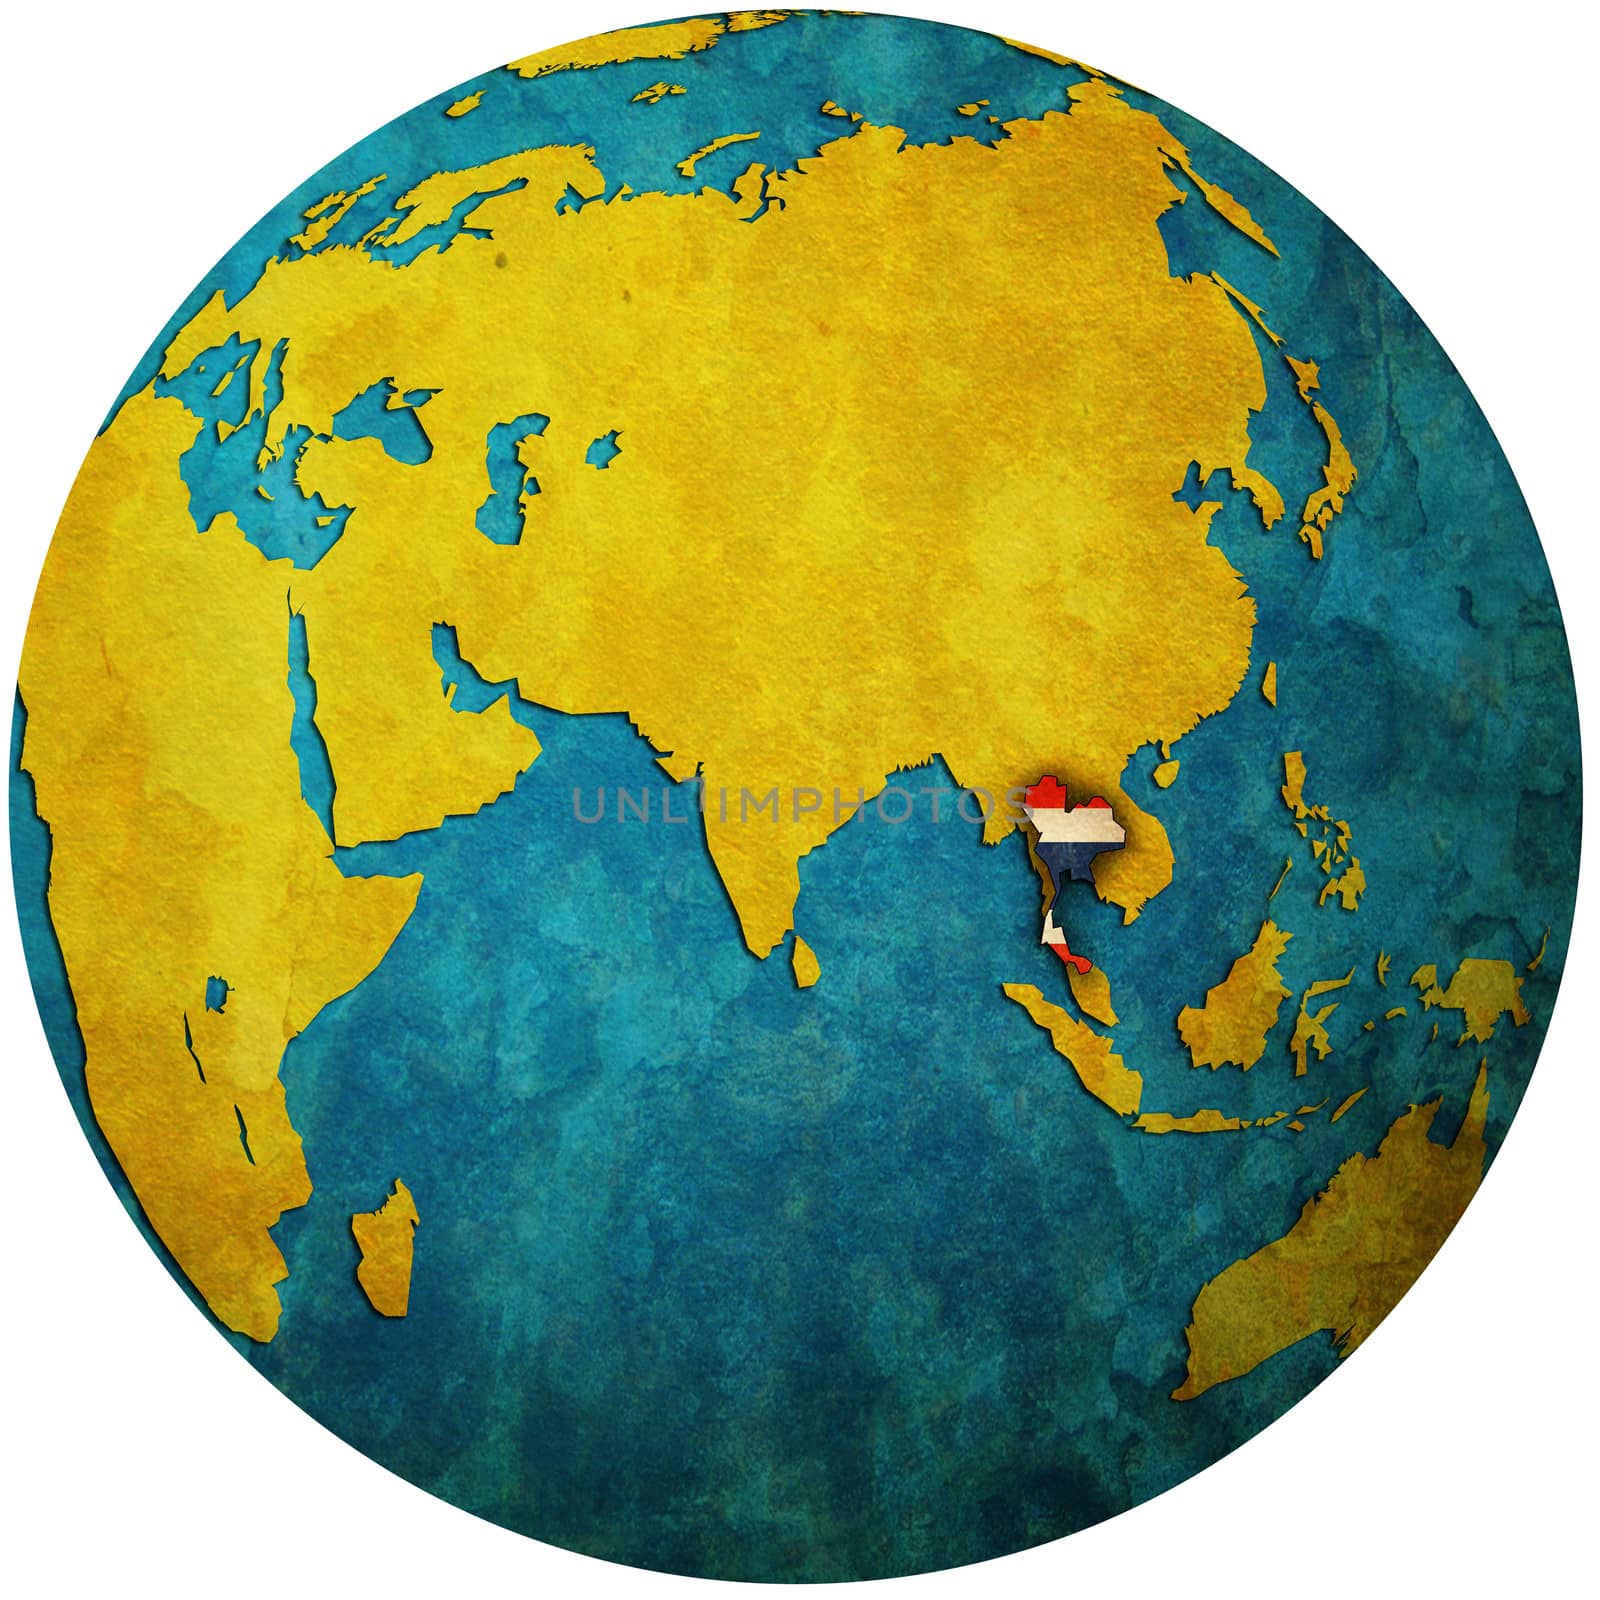 isolated over white territory of thailand with flag on globe map